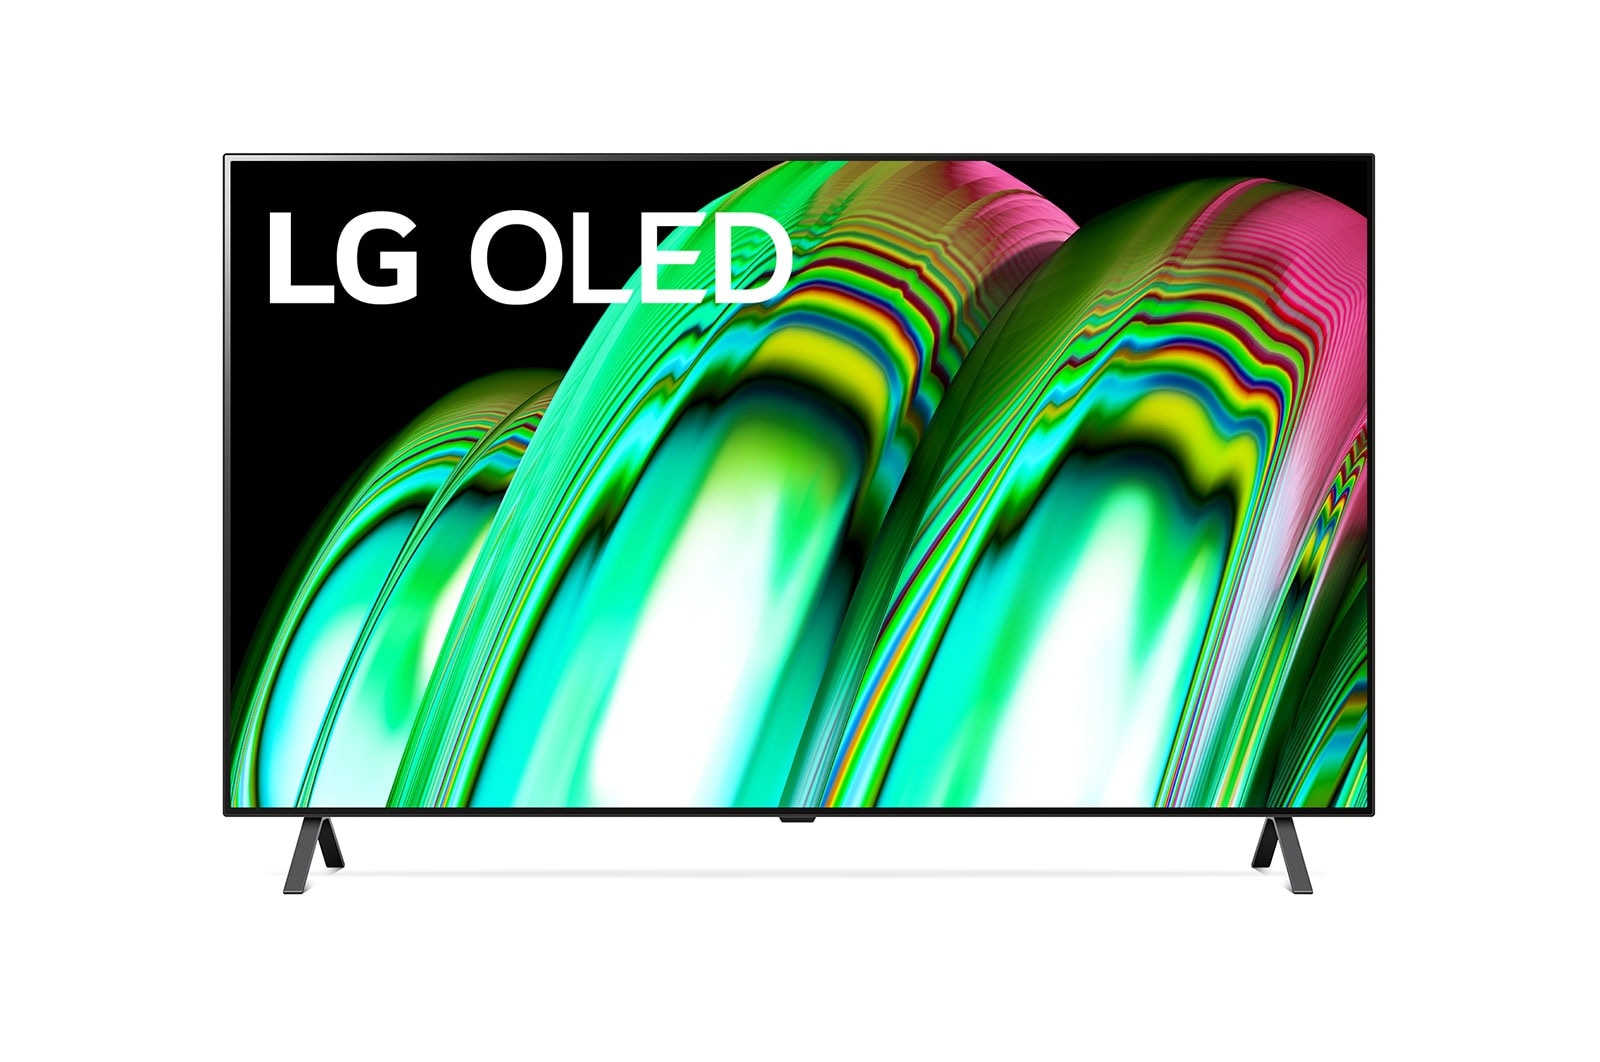 LG OLED TV A2 48 inch 4K Smart TV | Small TV | Wall mounted TV | TV wall design | Ultra HD 4K resolution | AI ThinQ , OLED48A2PSA